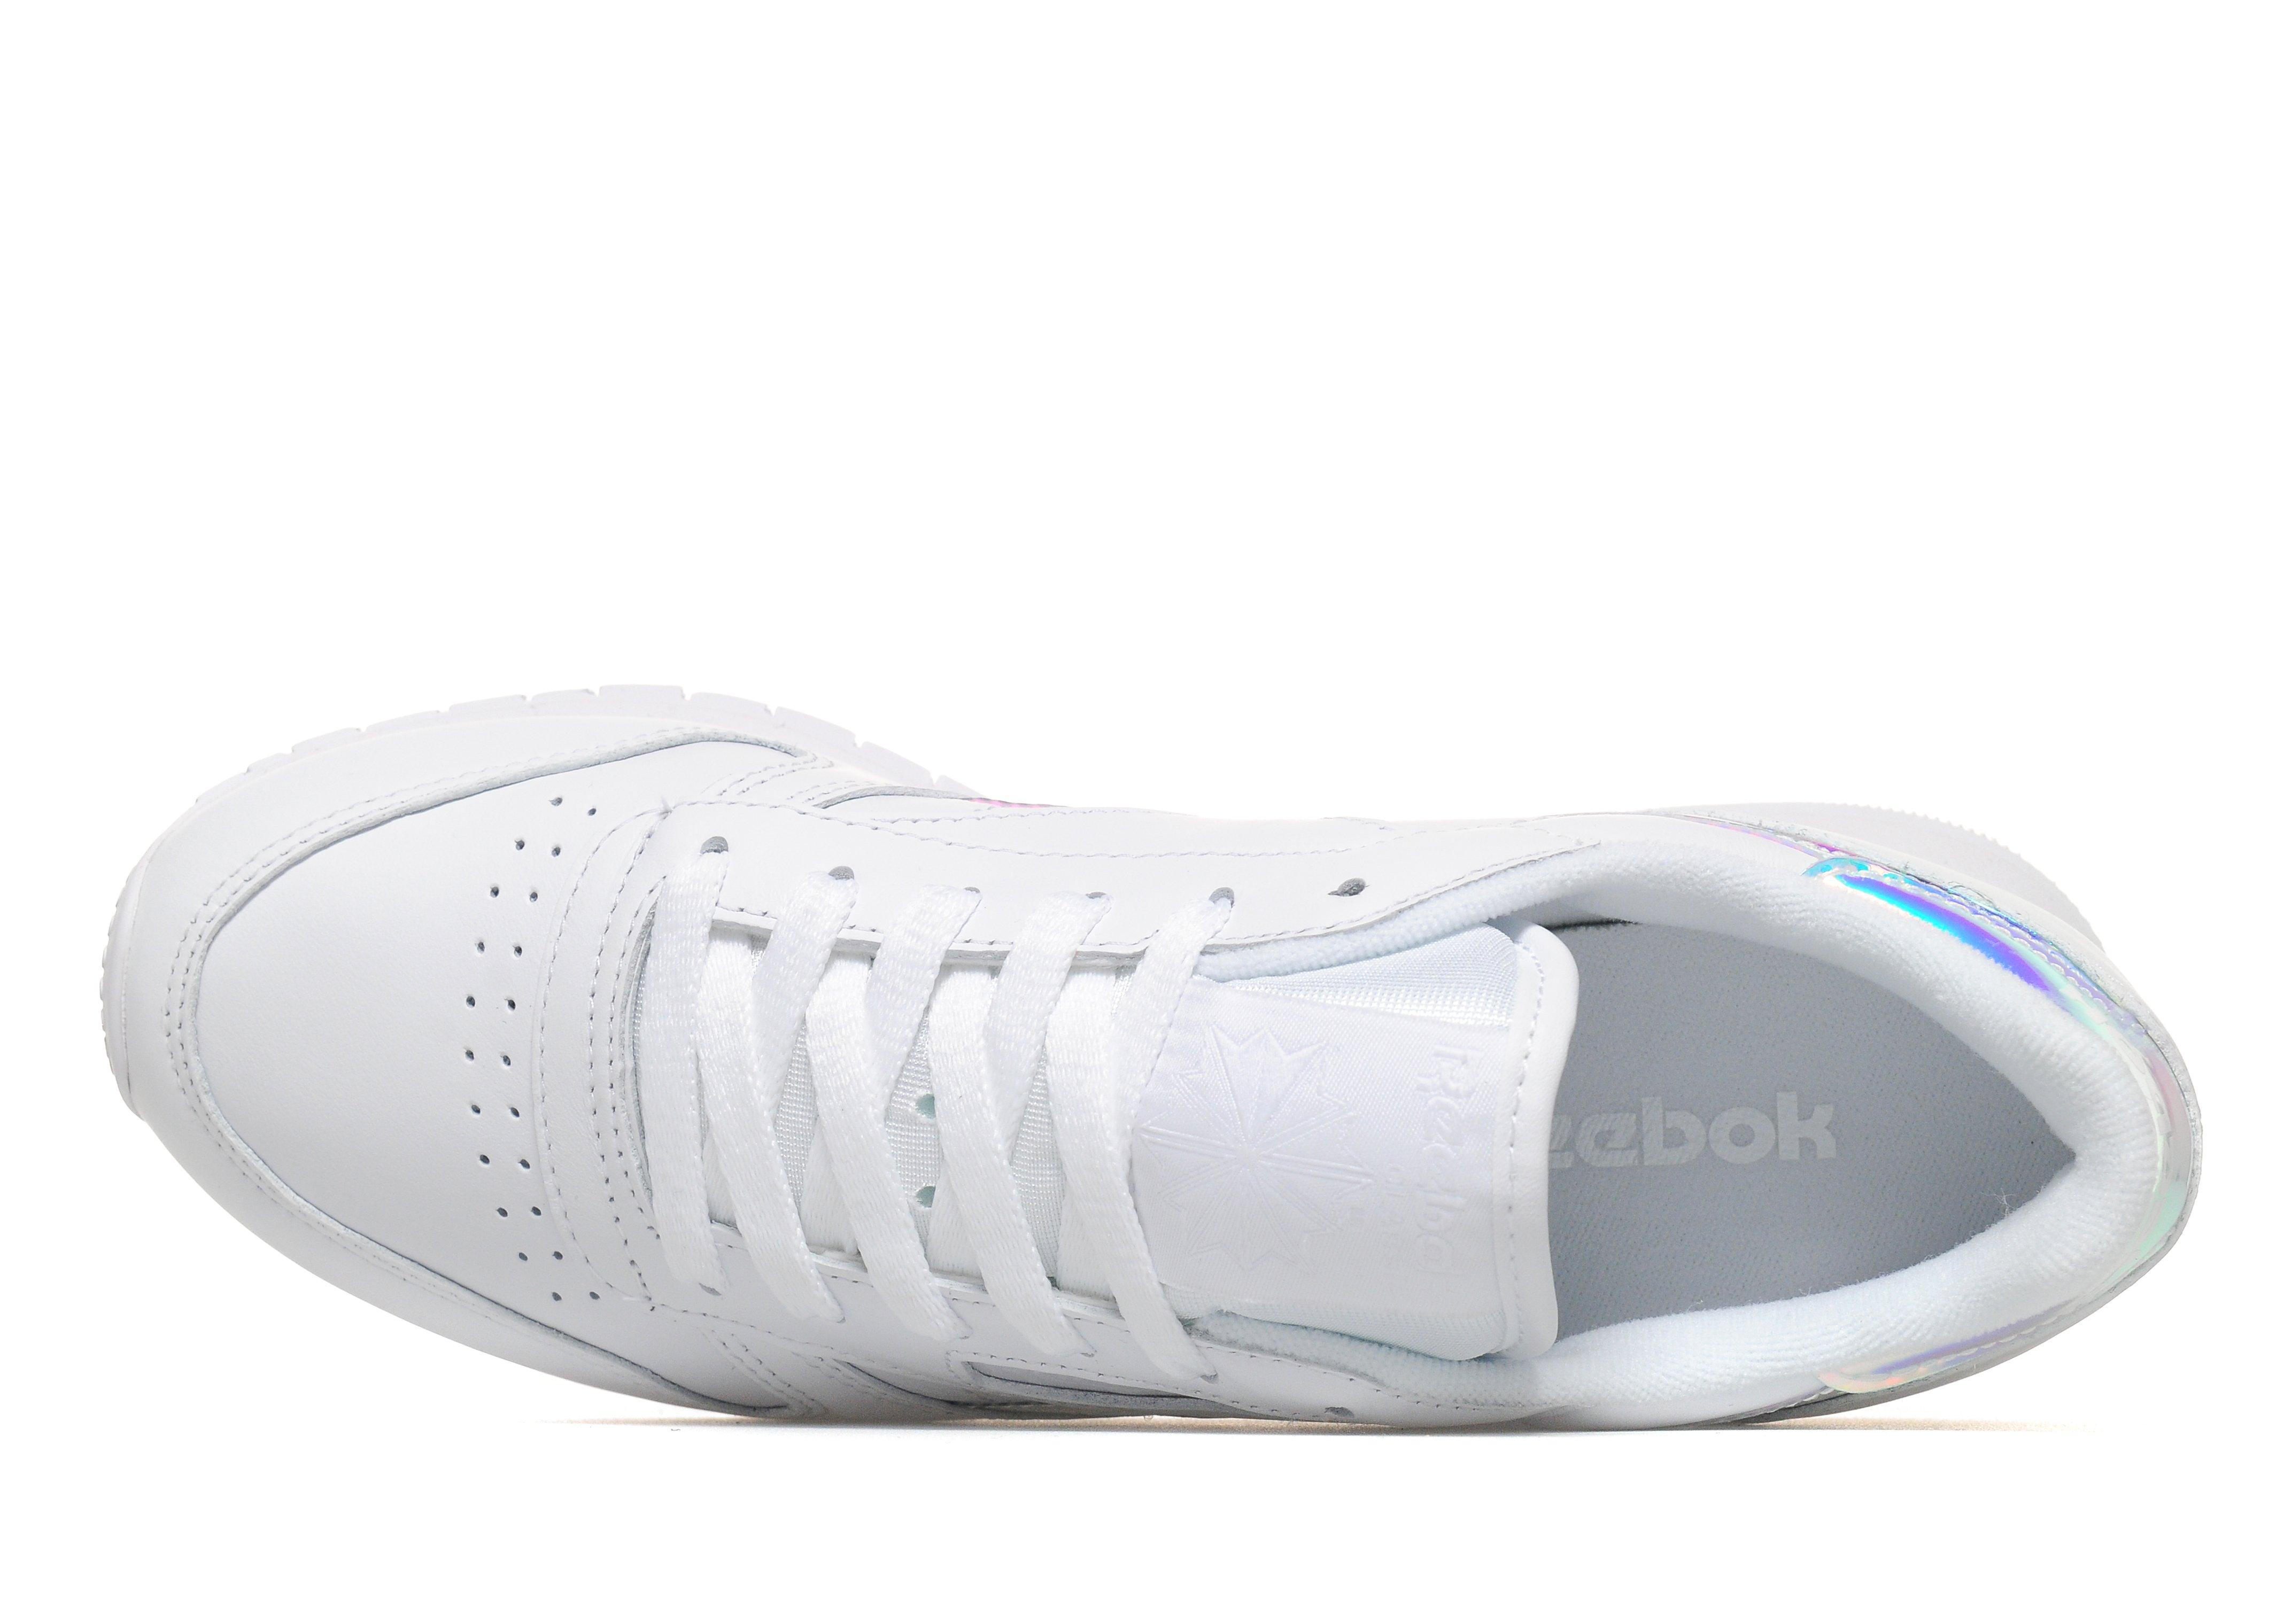 Reebok Classic Leather Iridescent in White - Lyst